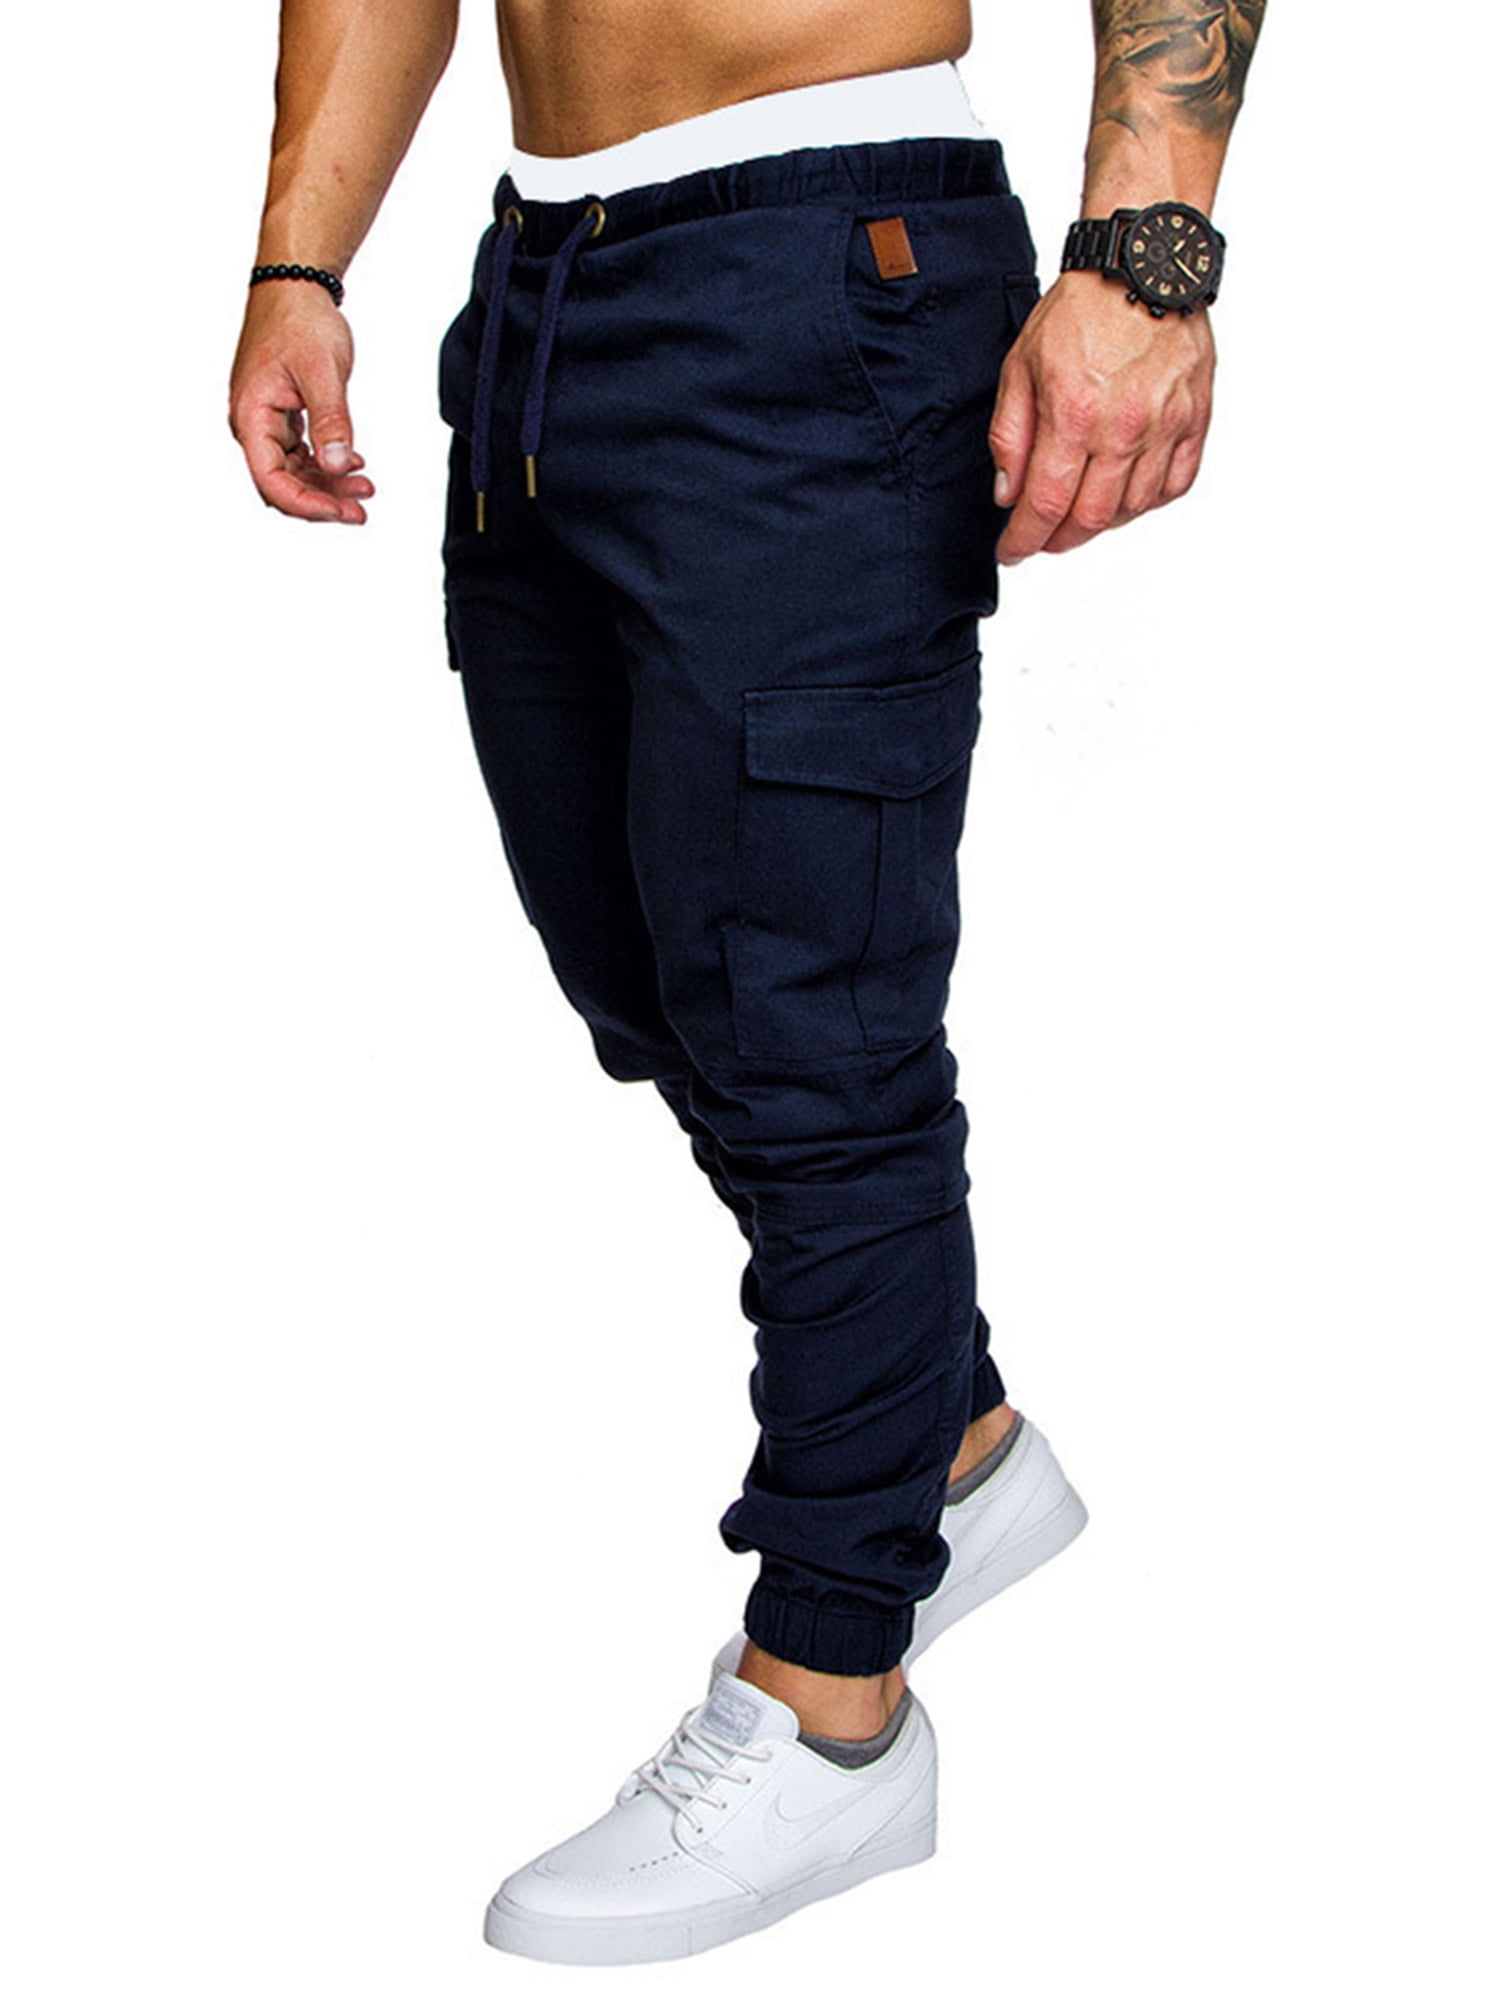 cllios Mens Cargo Pants Big and Tall Athletic Pants Outdoor Hiking